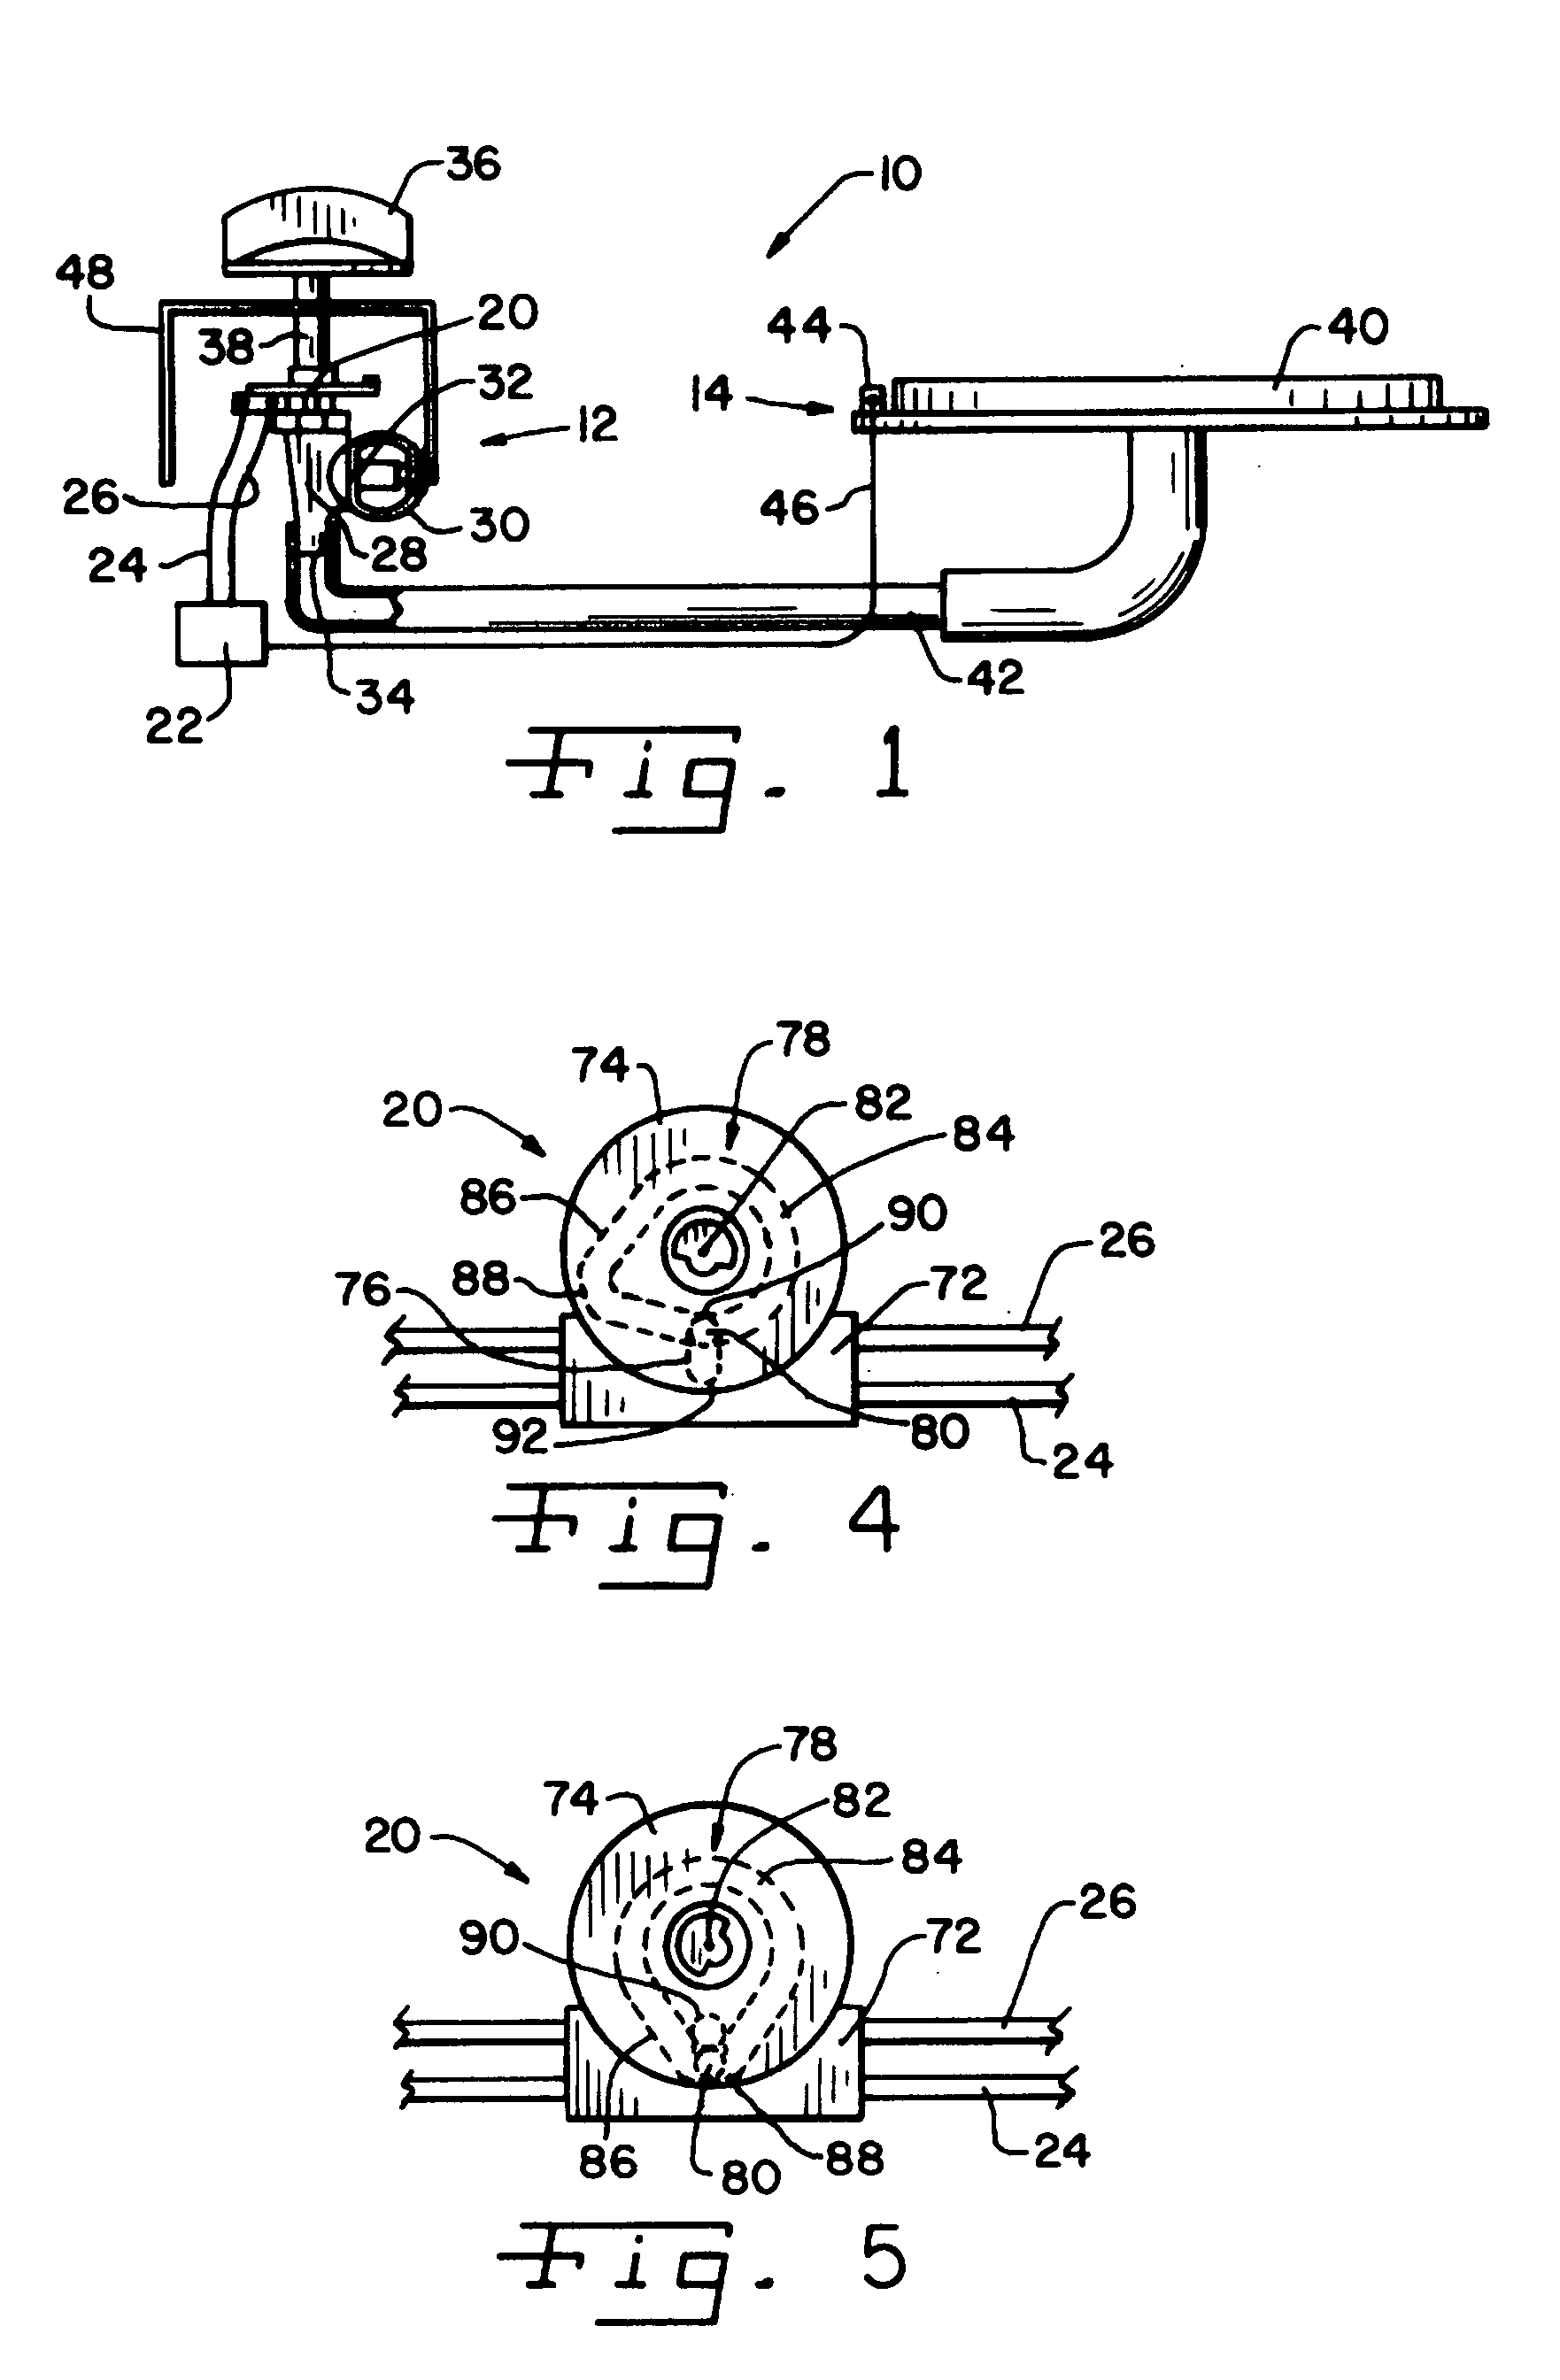 Rotary actuated reed switch control